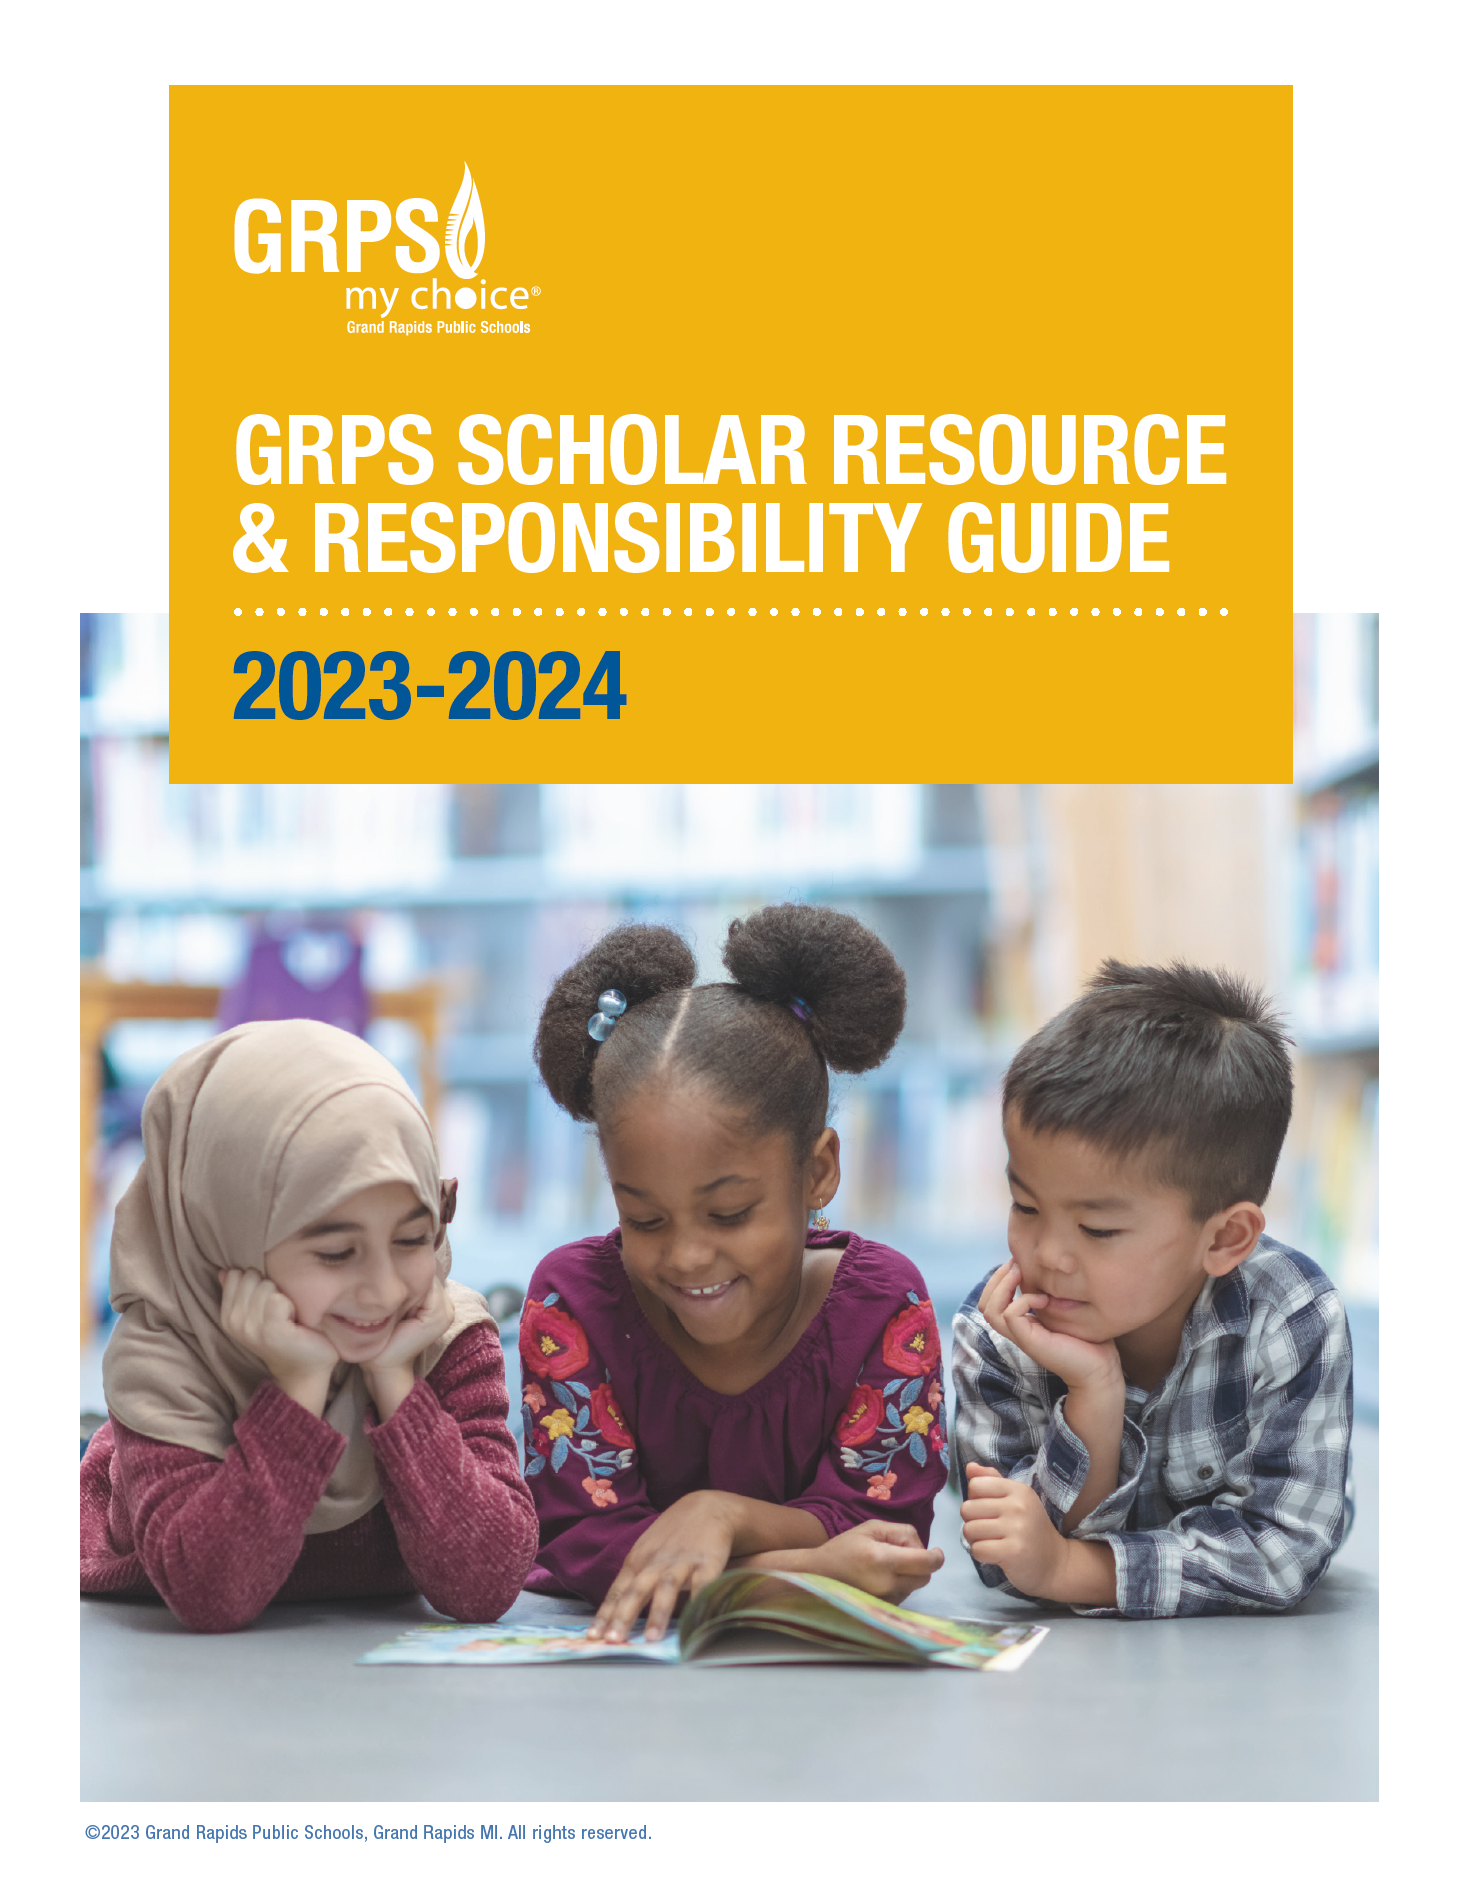 2022-2023 GRPS Scholar Resource & Responsibility Guide